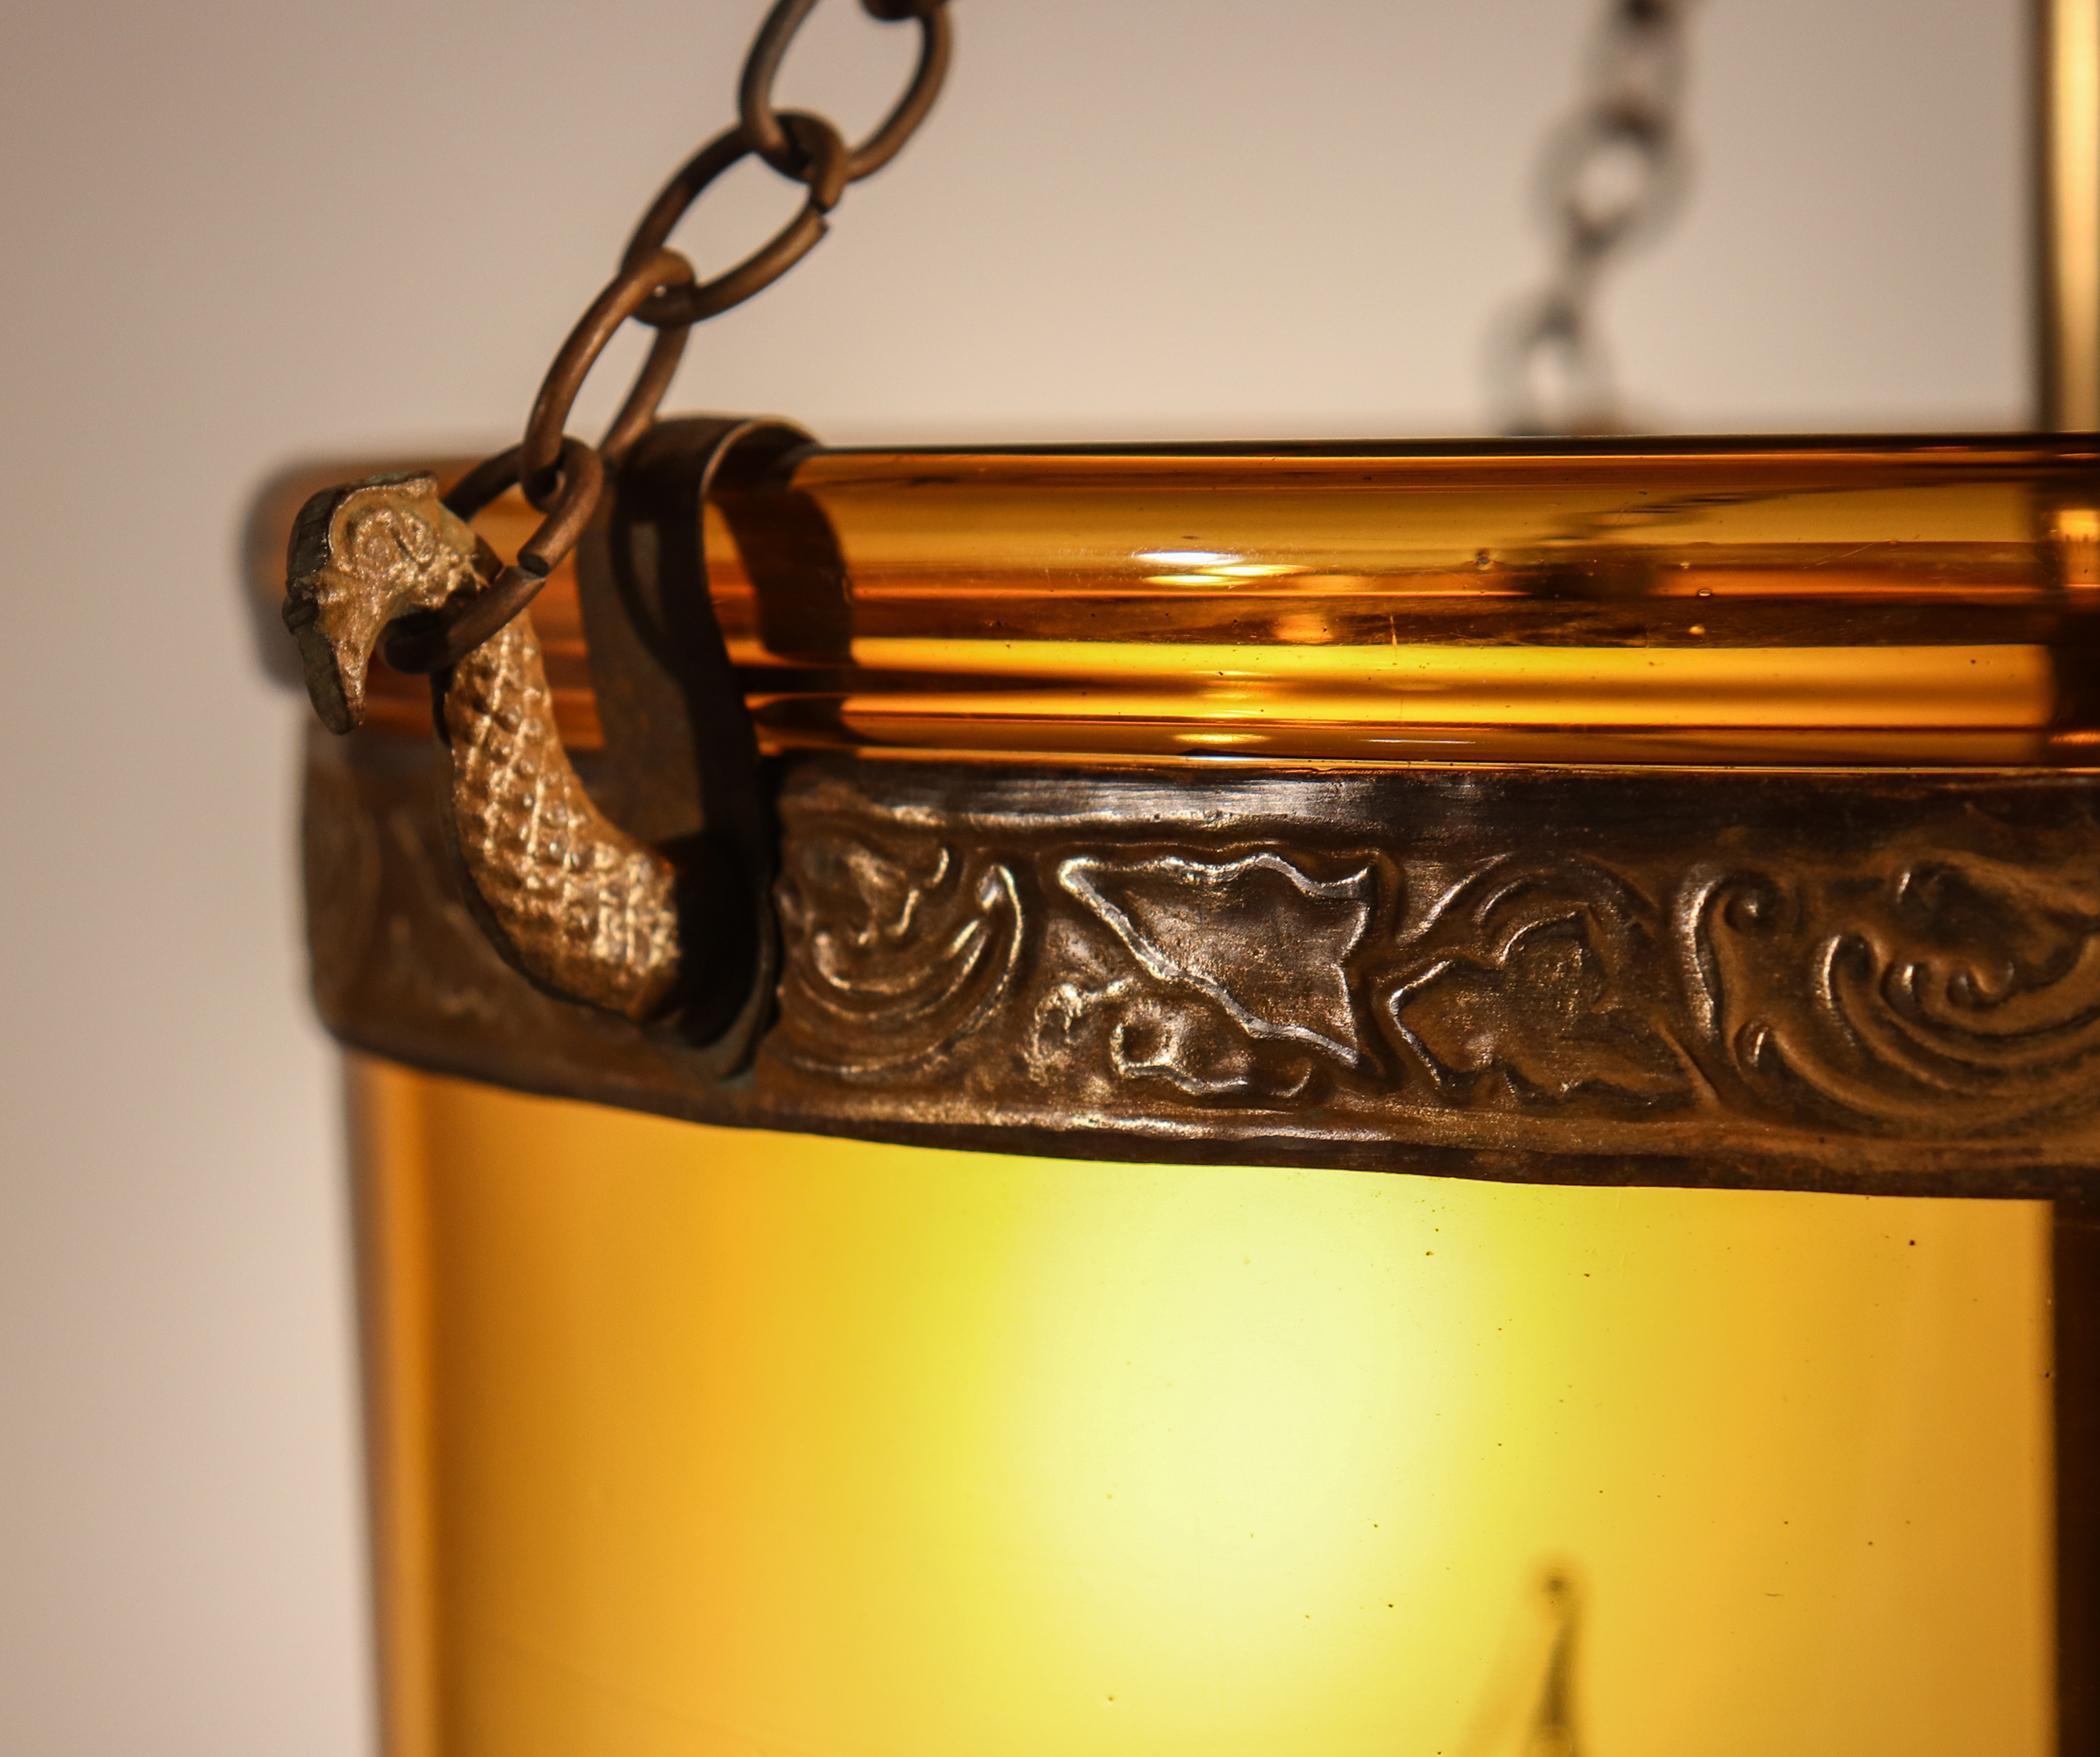 19th Century Antique Bell Jar Lantern with Amber Colored Glass